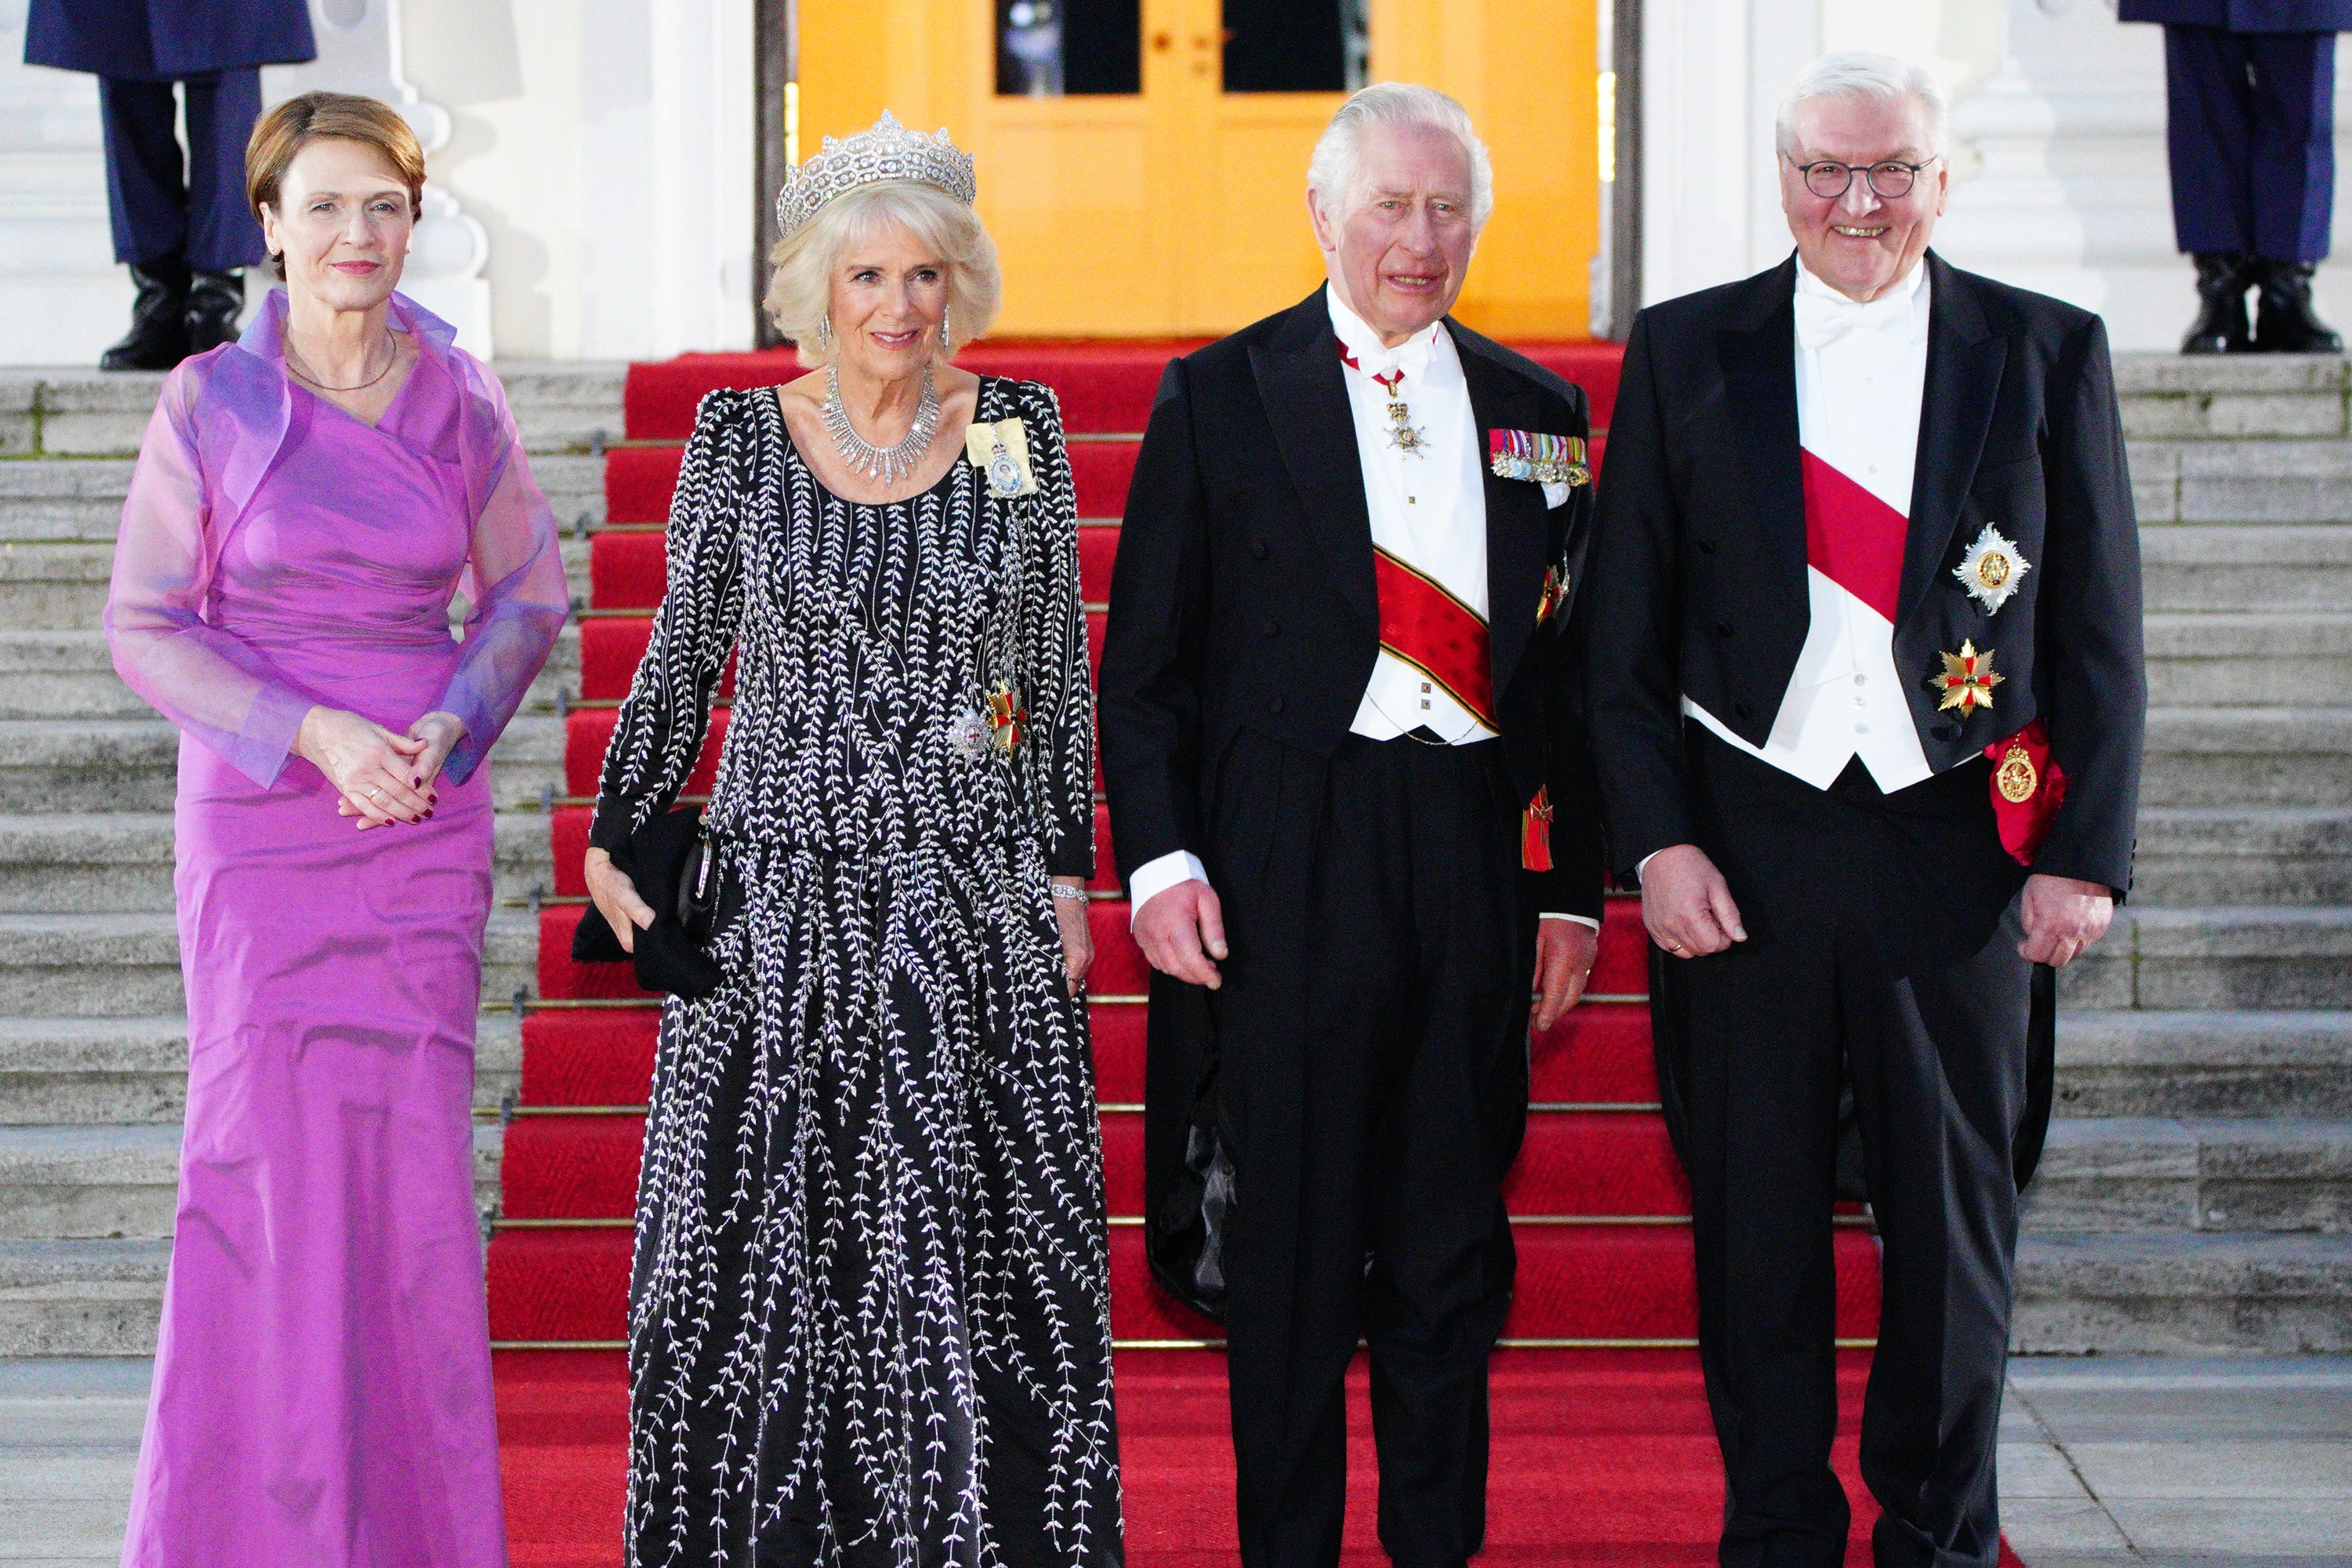 (left to right) Elke Budenbender, the Queen Consort, the King and German president Frank-Walter Steinmeier arrive at the state banquet at Bellevue Palace (Ben Birchall/PA)